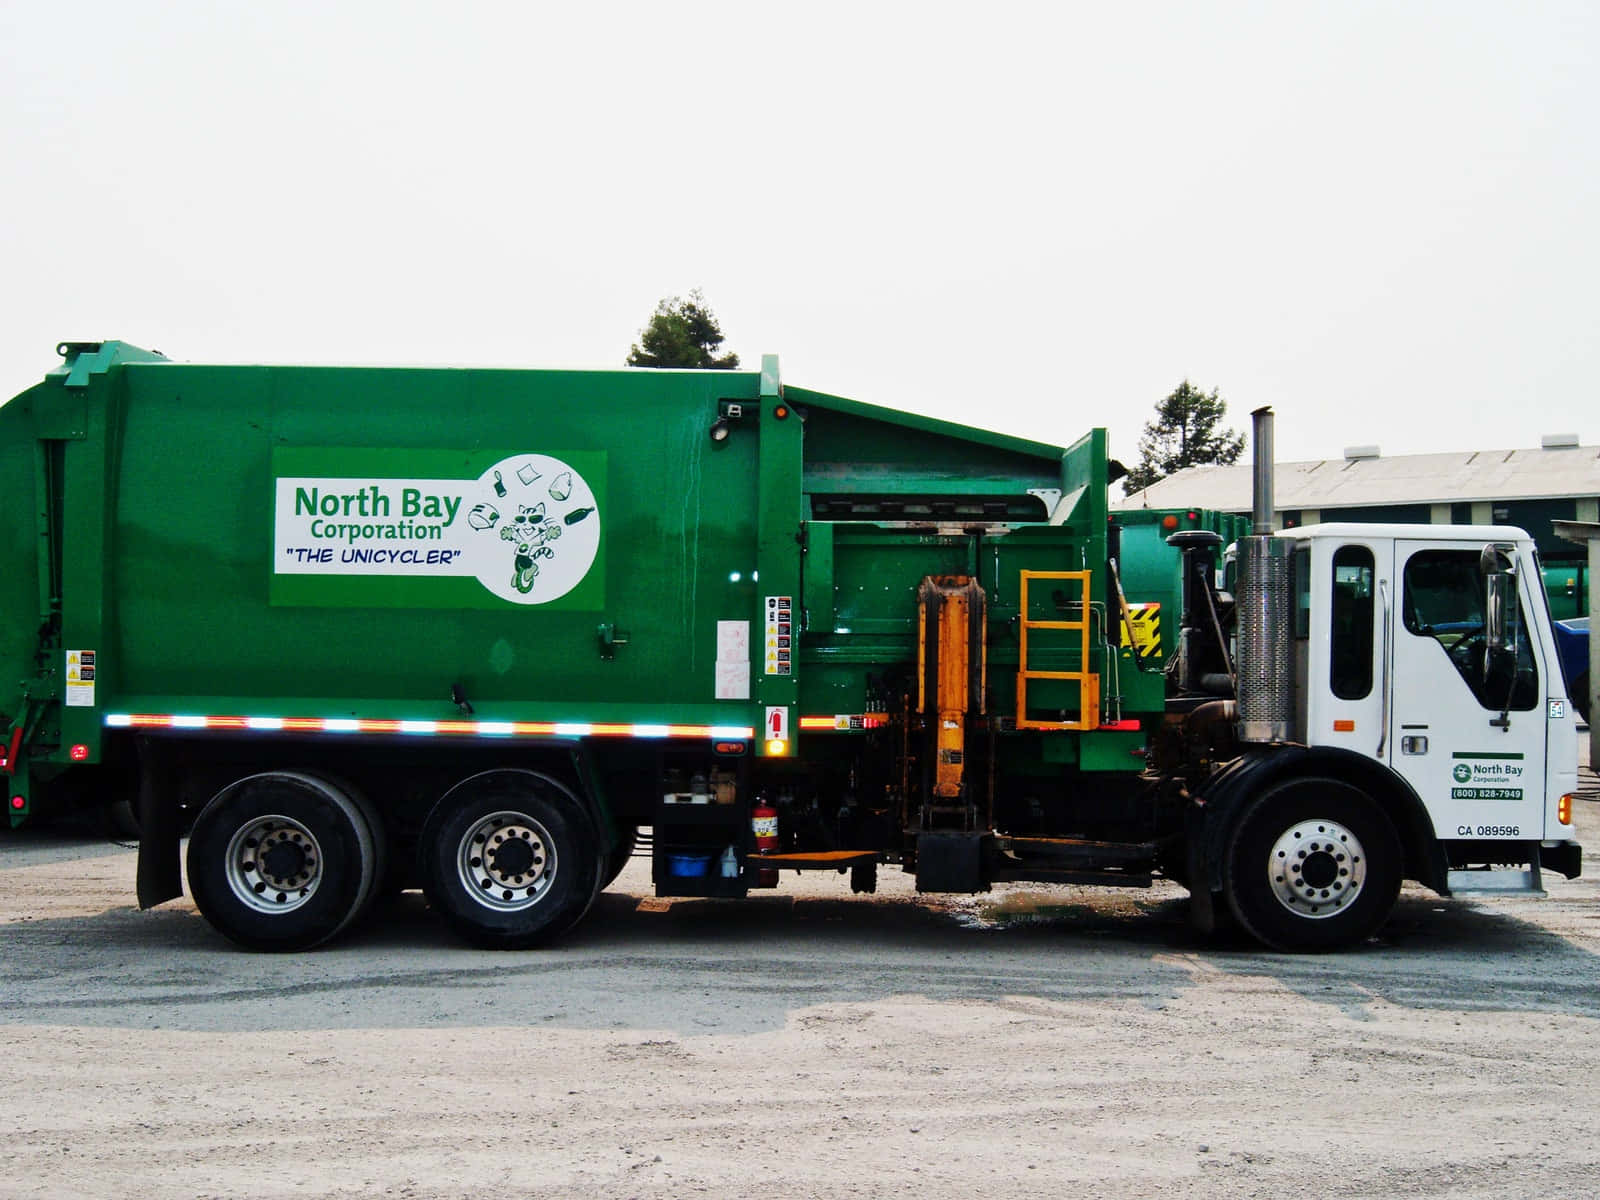 A Green Garbage Truck